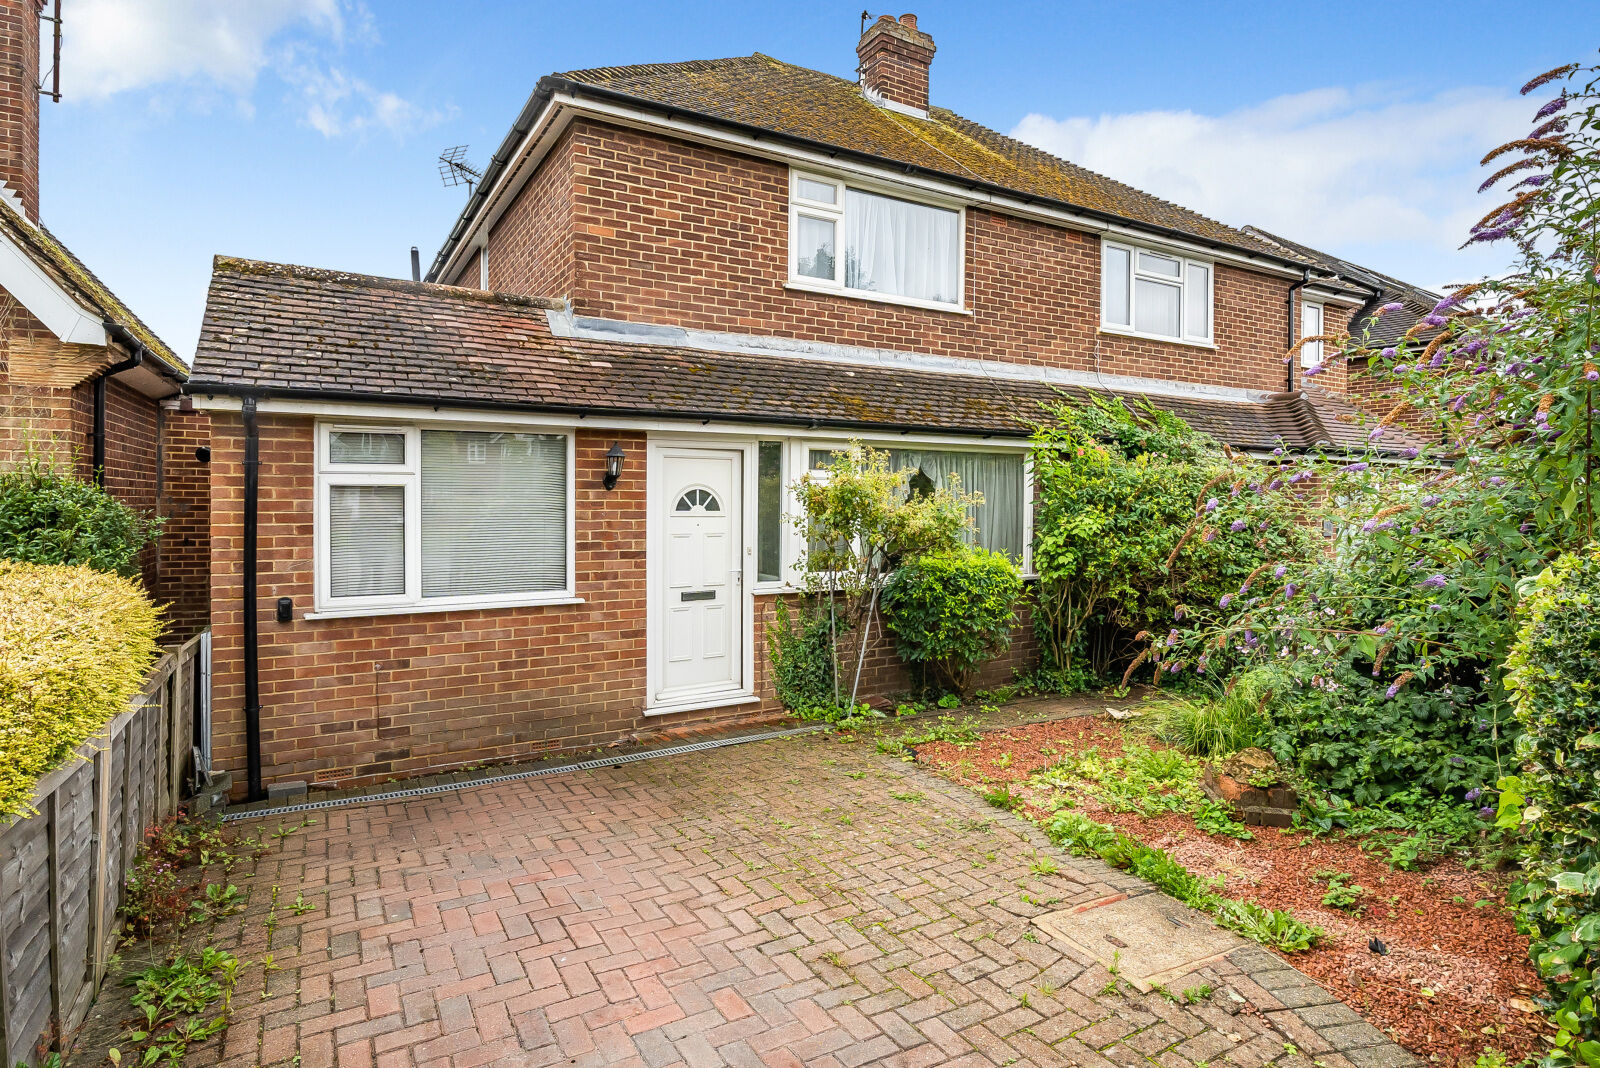 2 bedroom semi detached house for sale Falmouth Road, Reading, RG2, main image